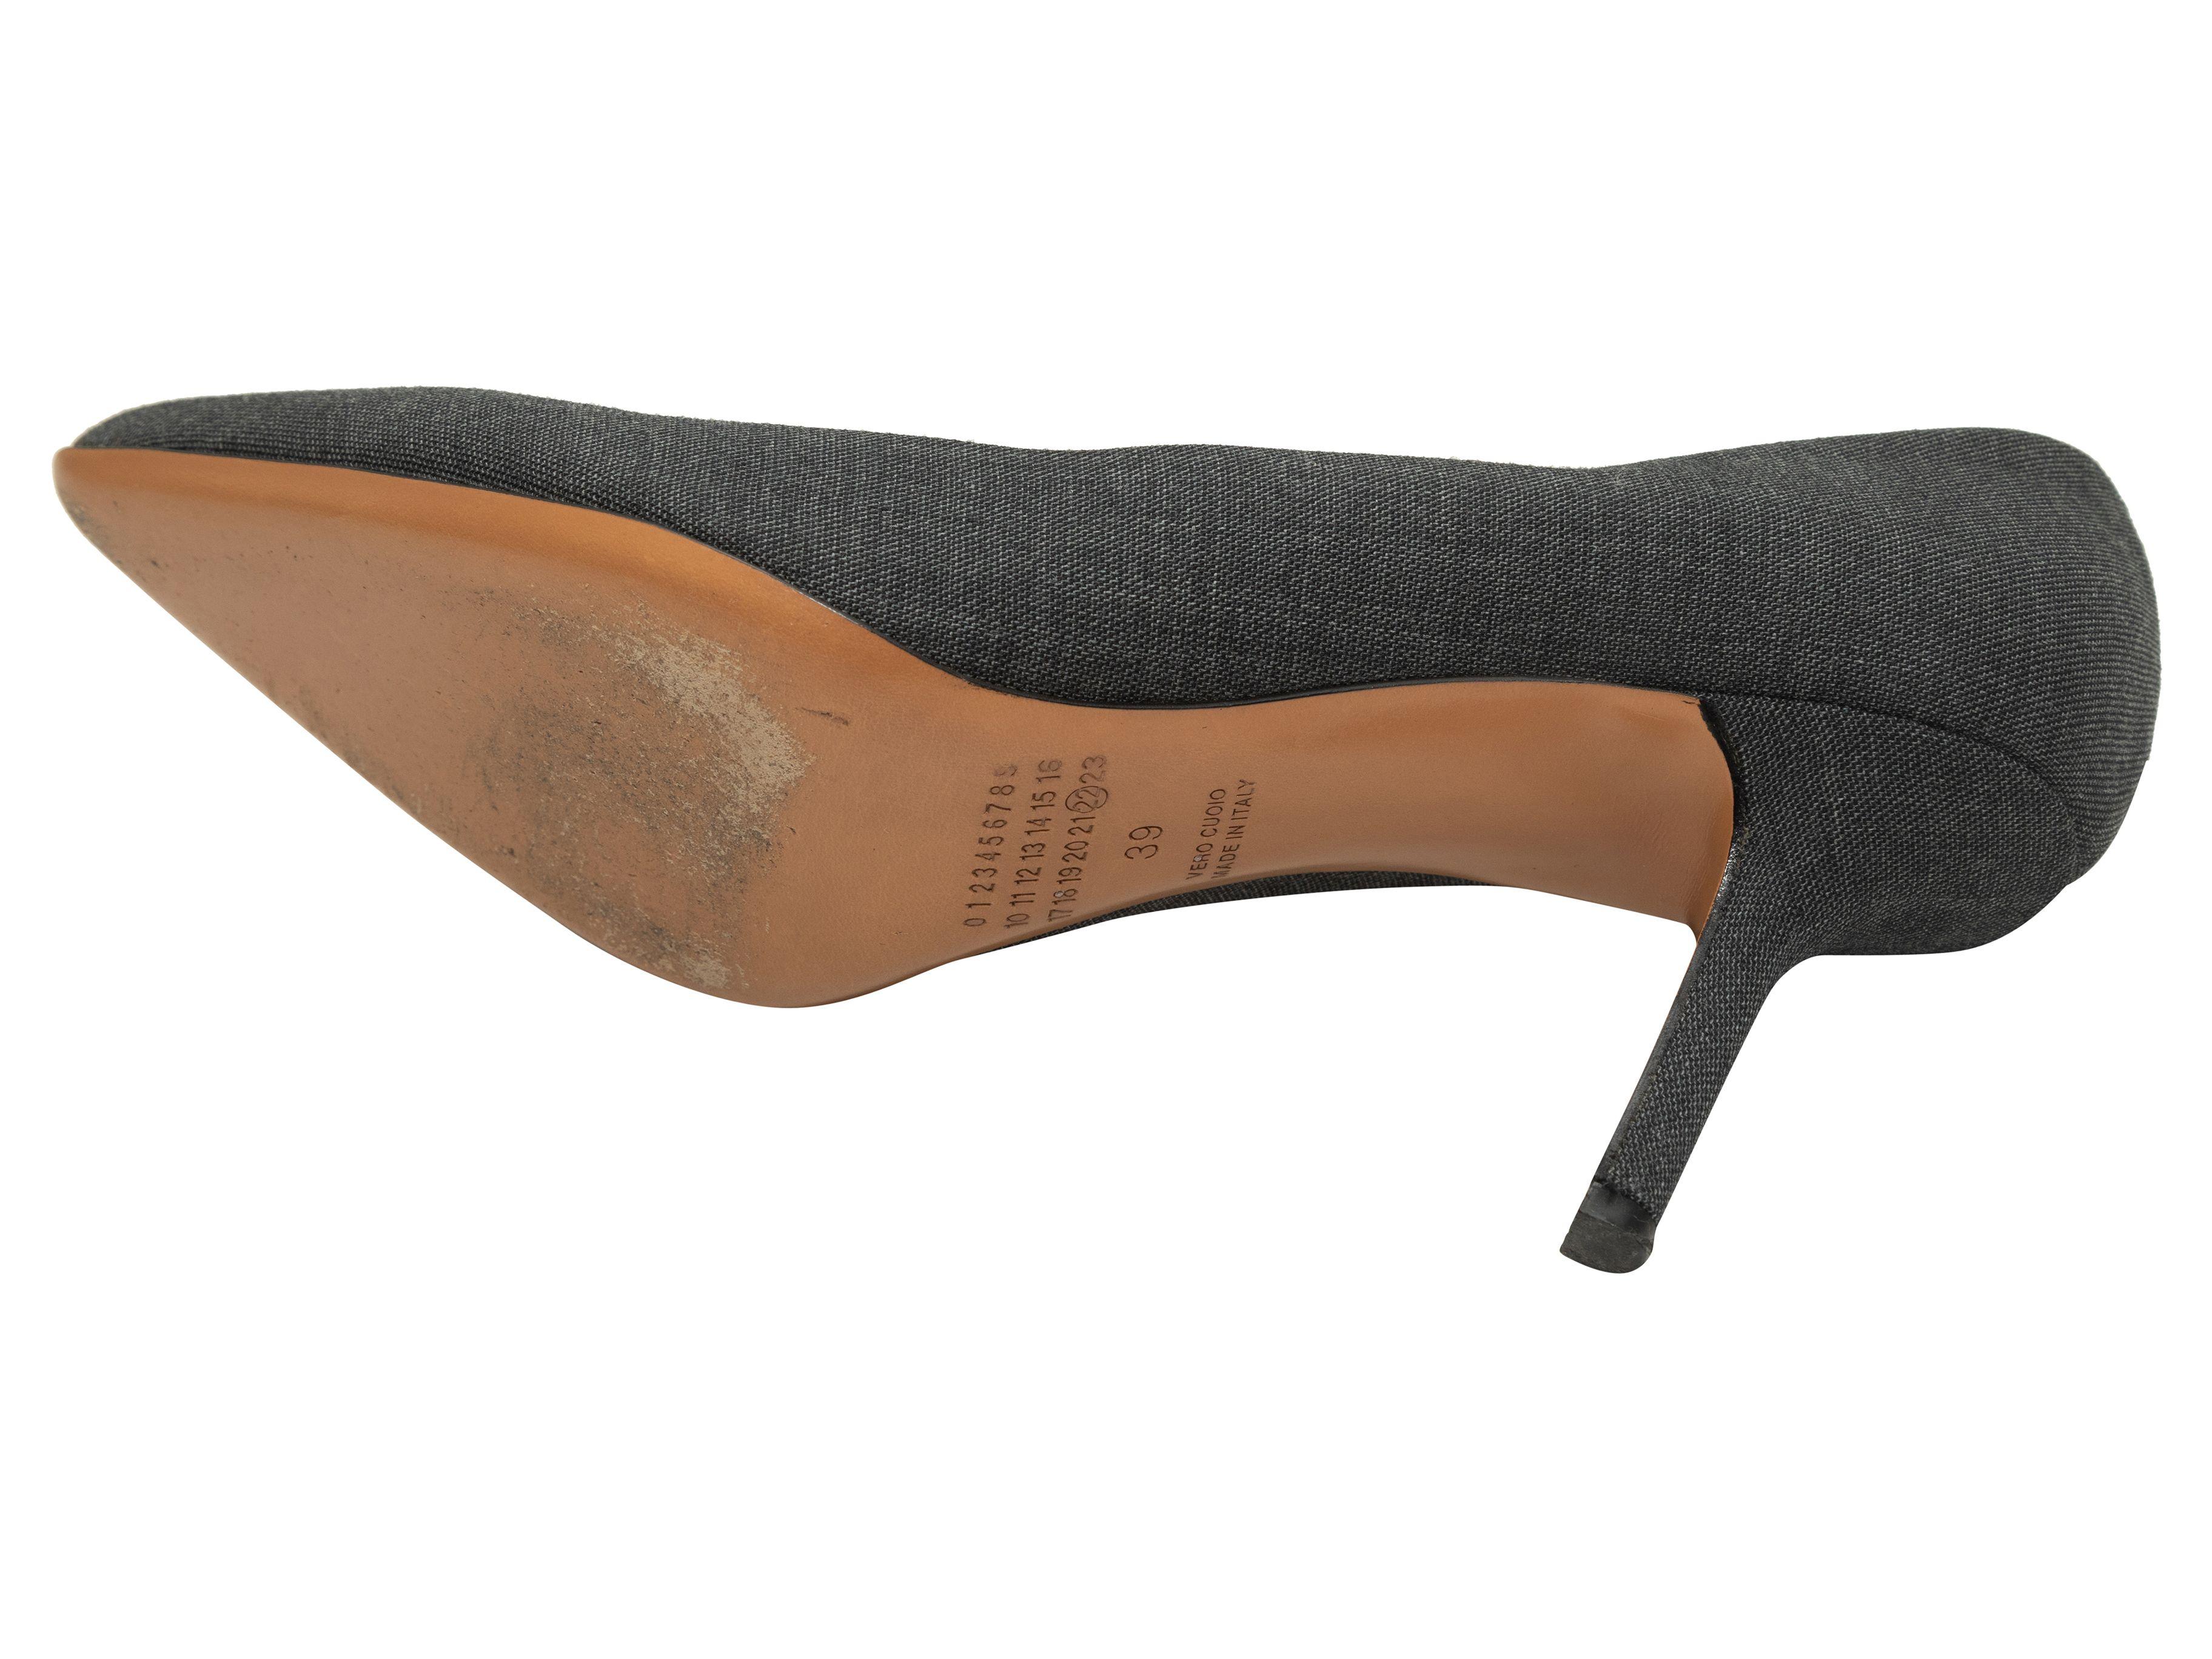 Product Details: Grey wool pointed-toe pumps by Maison Margiela. Covered heels. 3